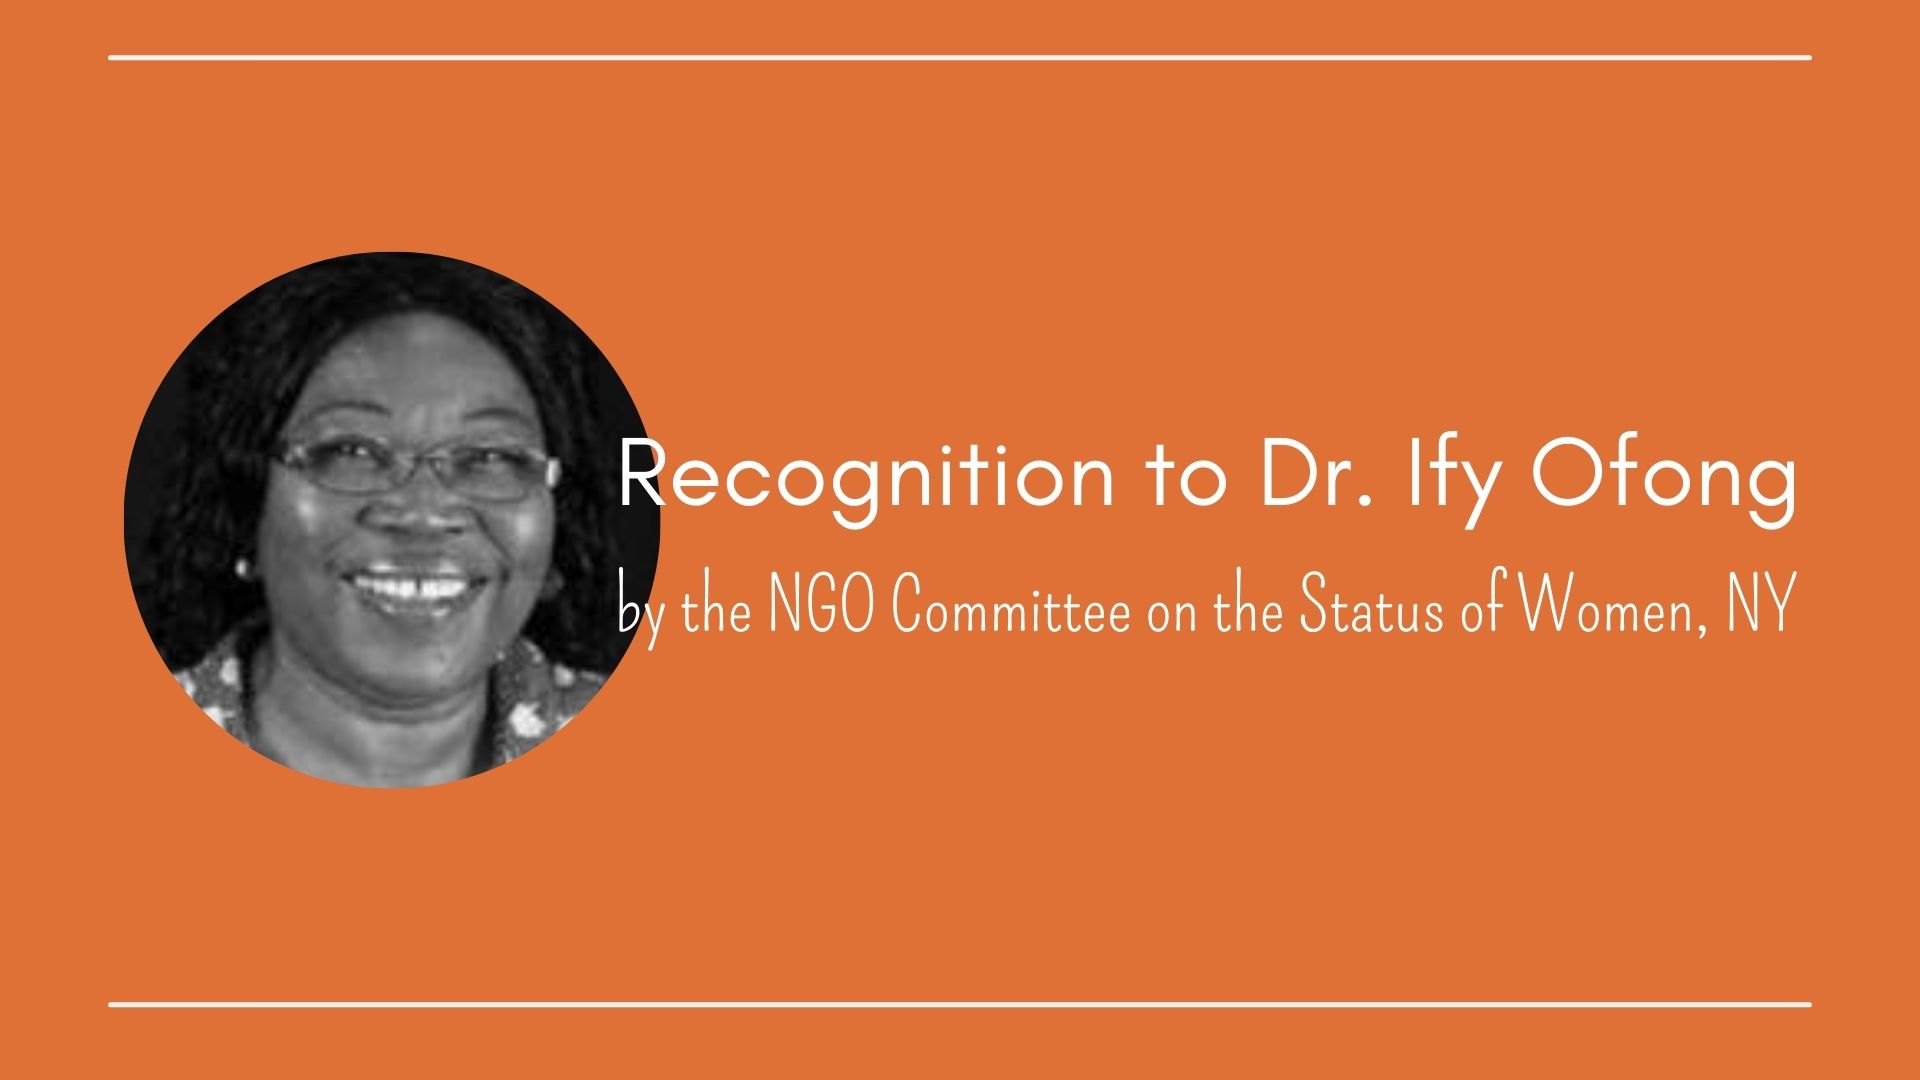 Recognition to Dr. Ify Ofong by the NGO Committee on the Status of Women, NY